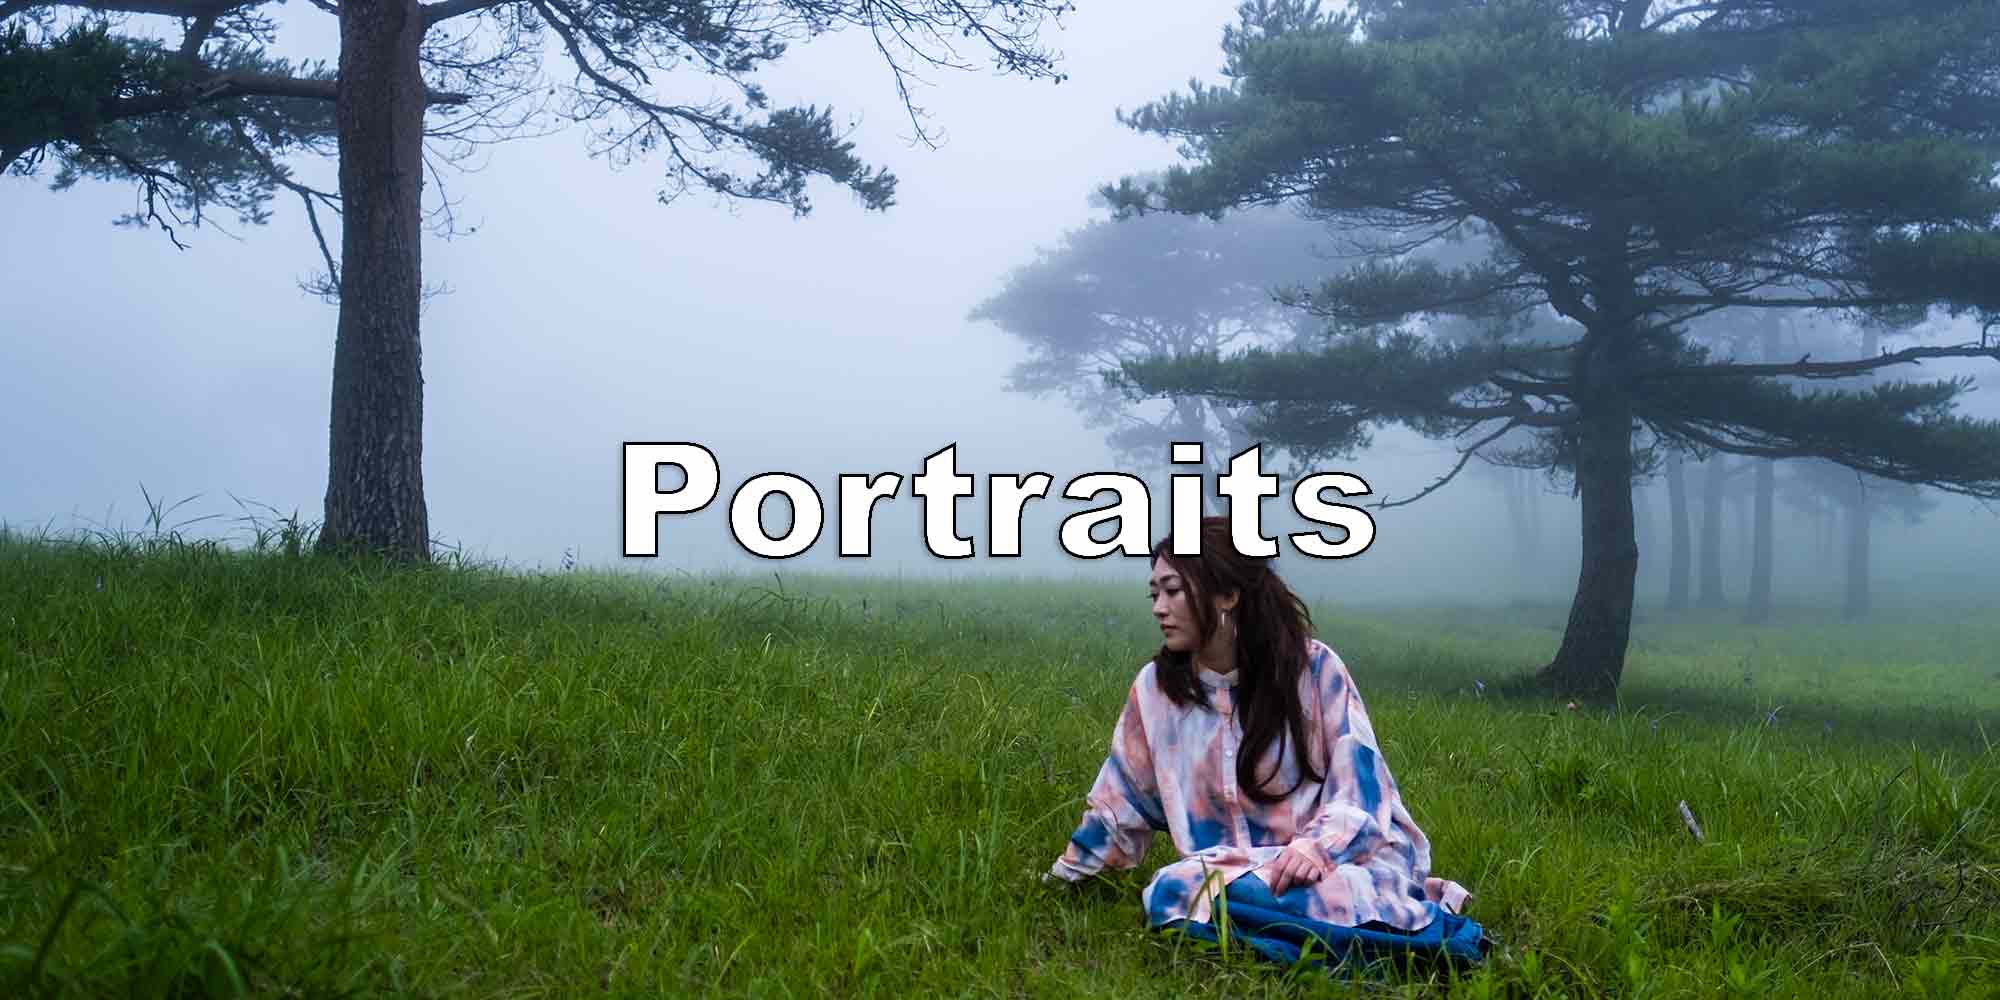 Misty portrait of woman wrapped in blanket amidst foggy forest, part of photography portfolio.